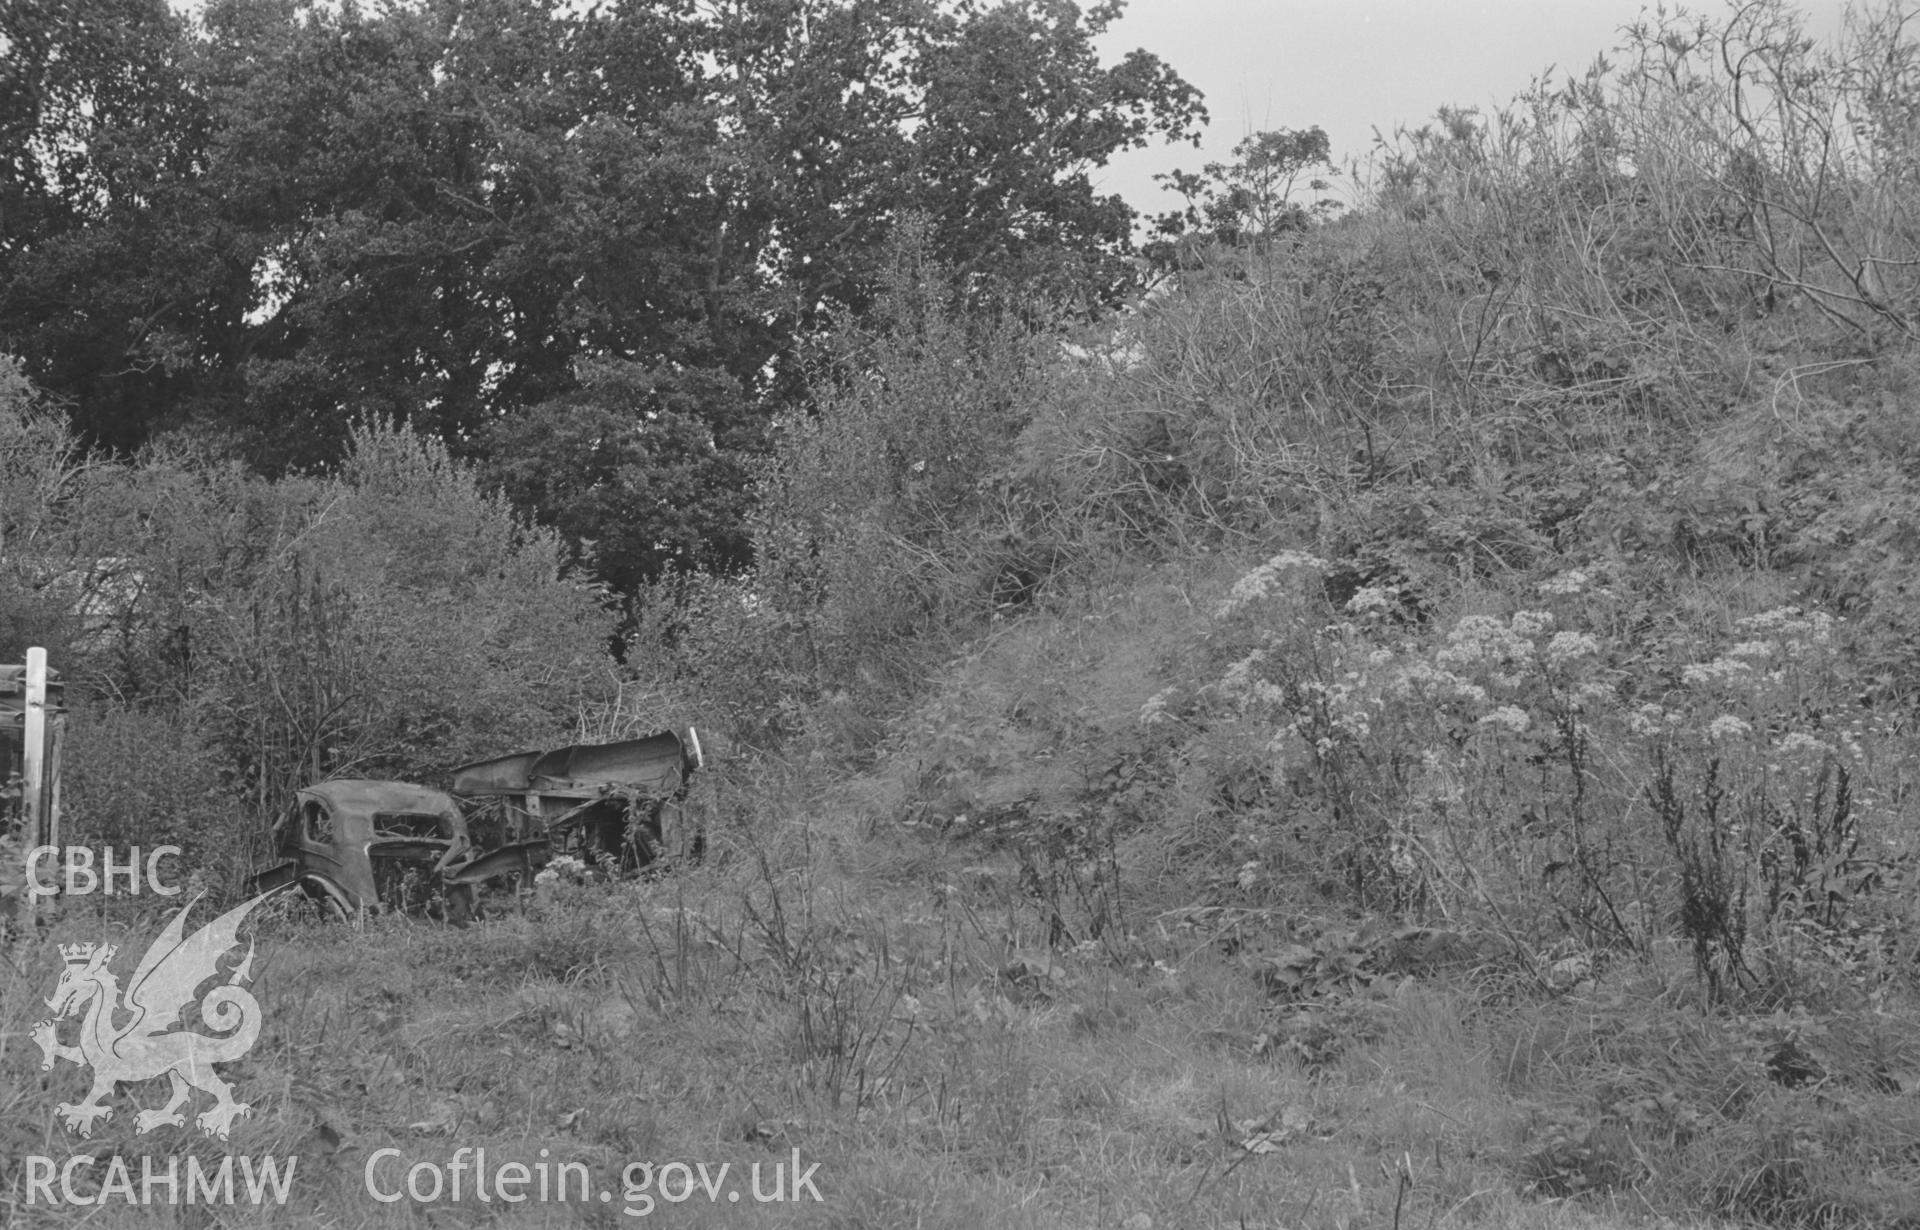 Digital copy of a black and white negative showing view along the north western side of the Norman motte of Castell Ddol-Wlff, Llanybydder. Photographed in September 1963 by Arthur O. Chater from Grid Reference SN 5200 4453, looking east north east.